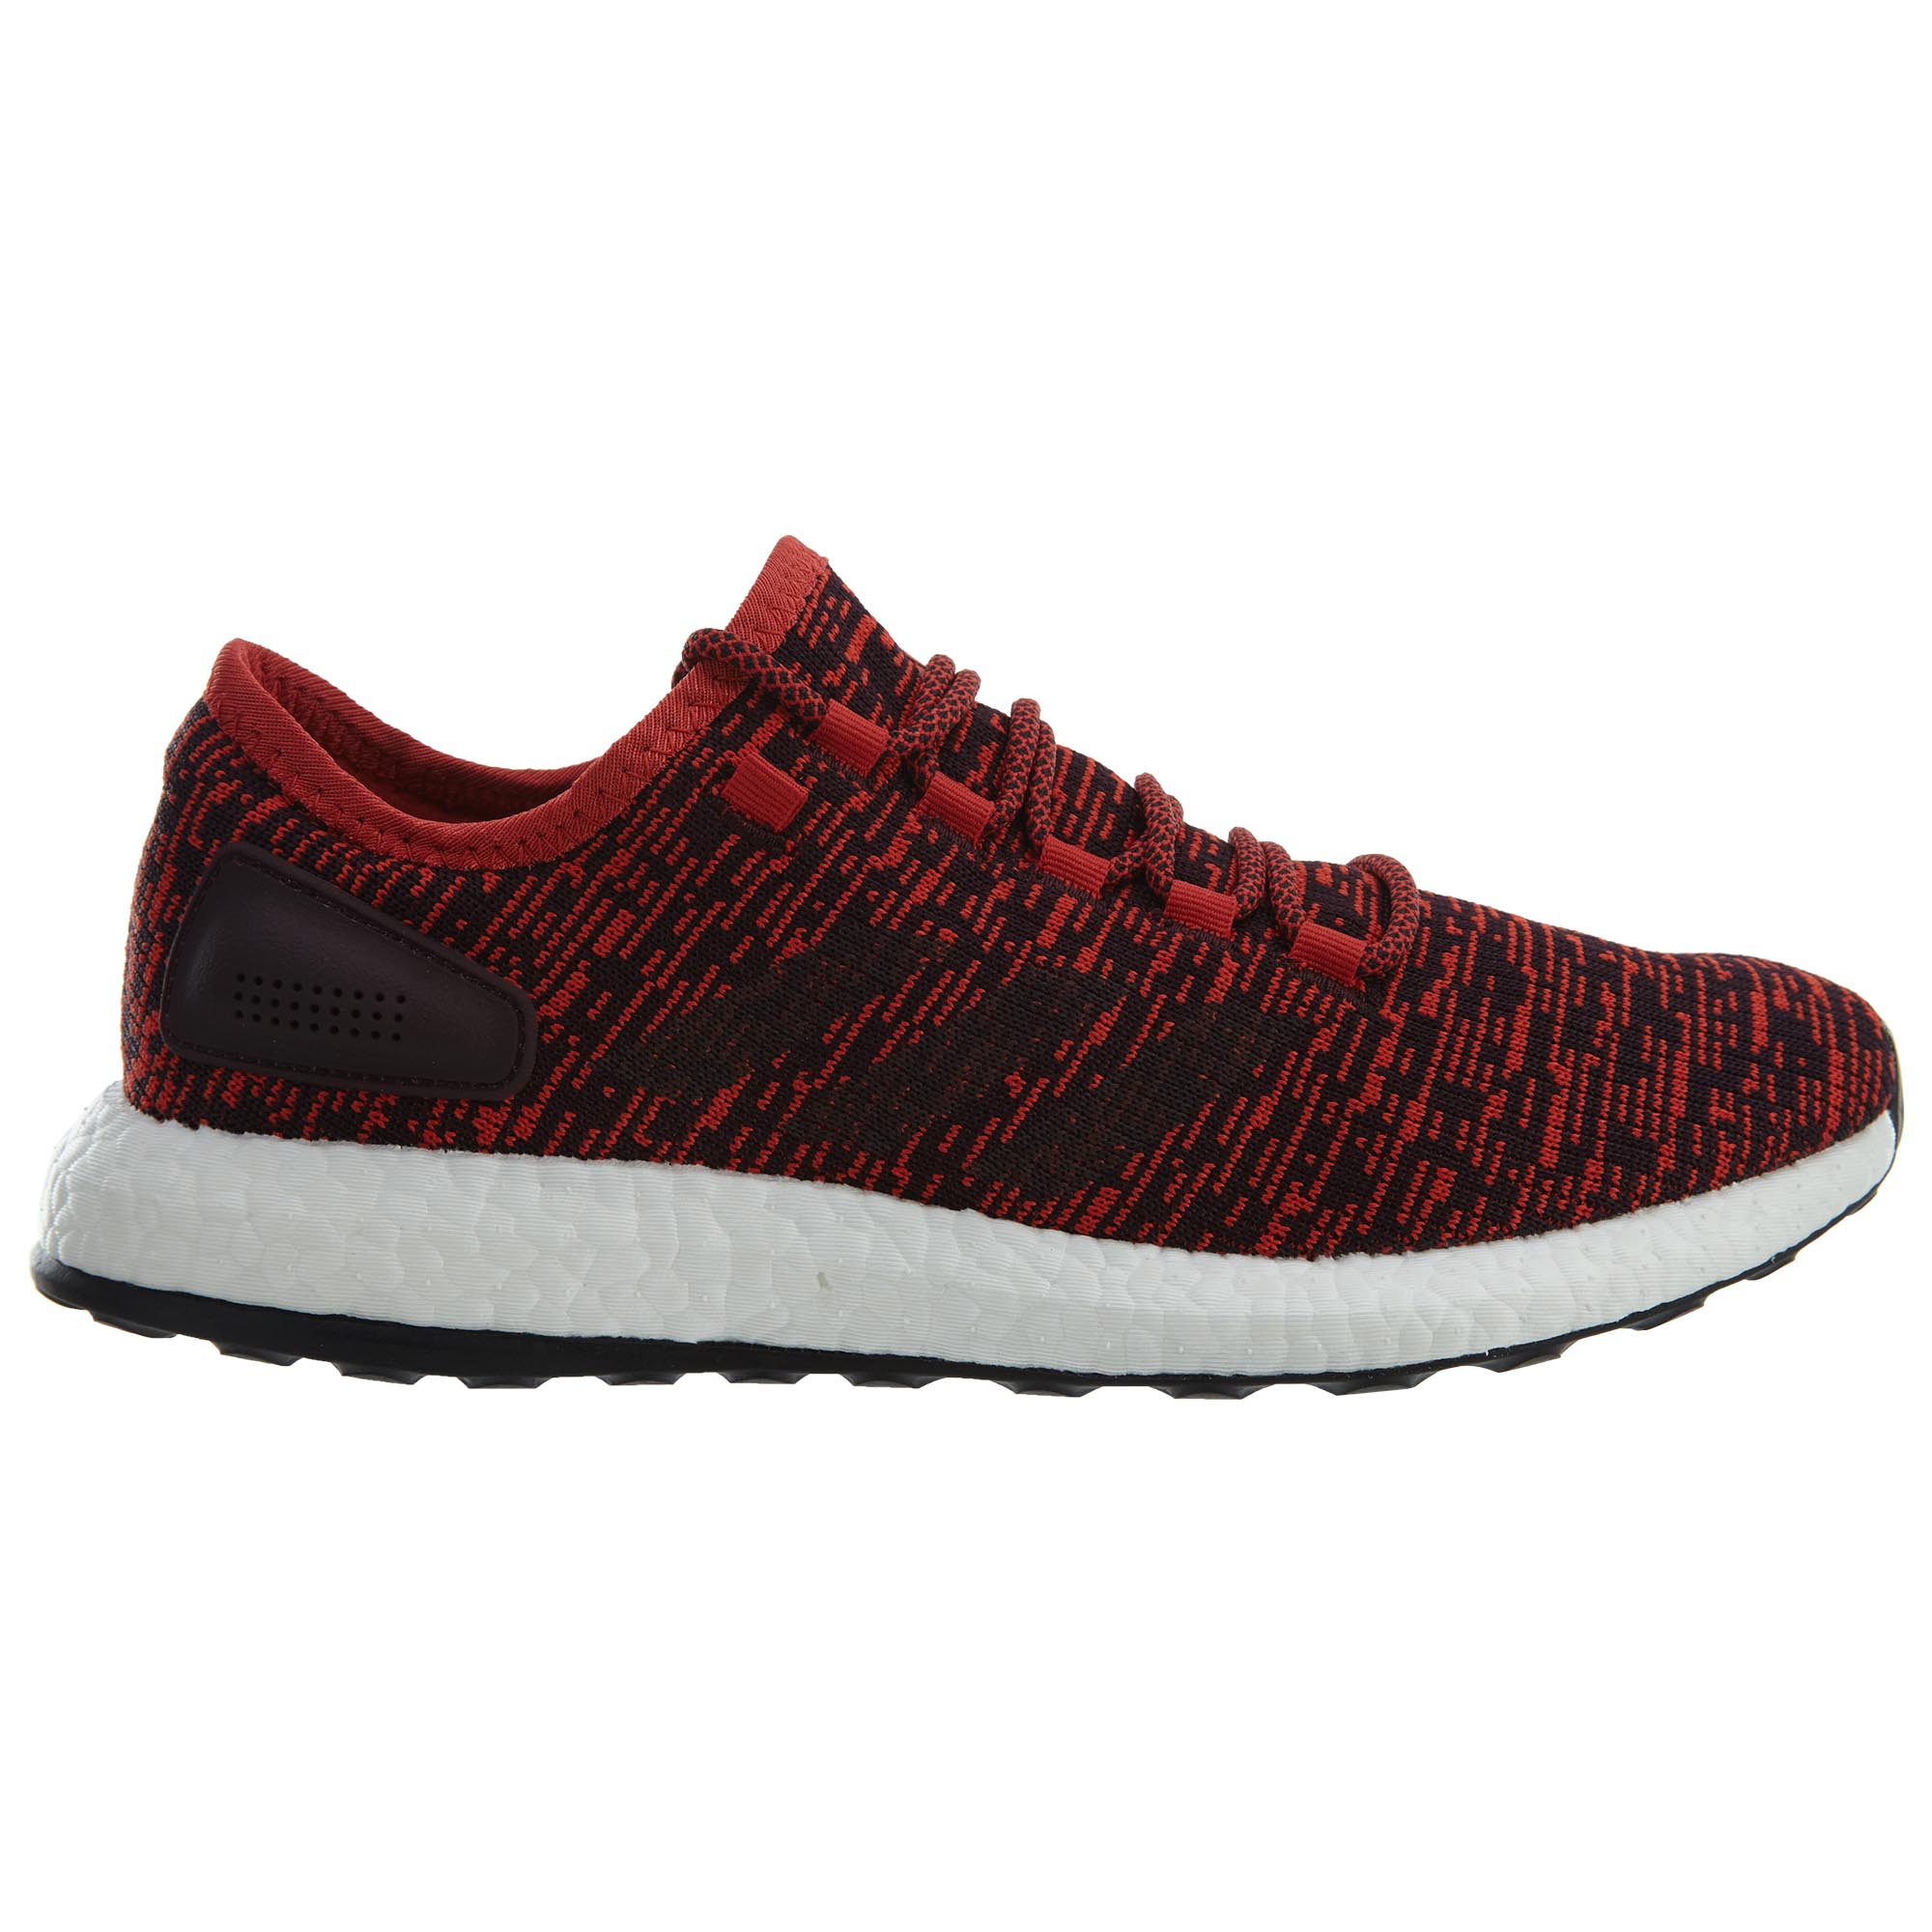 adidas pure boost red black 